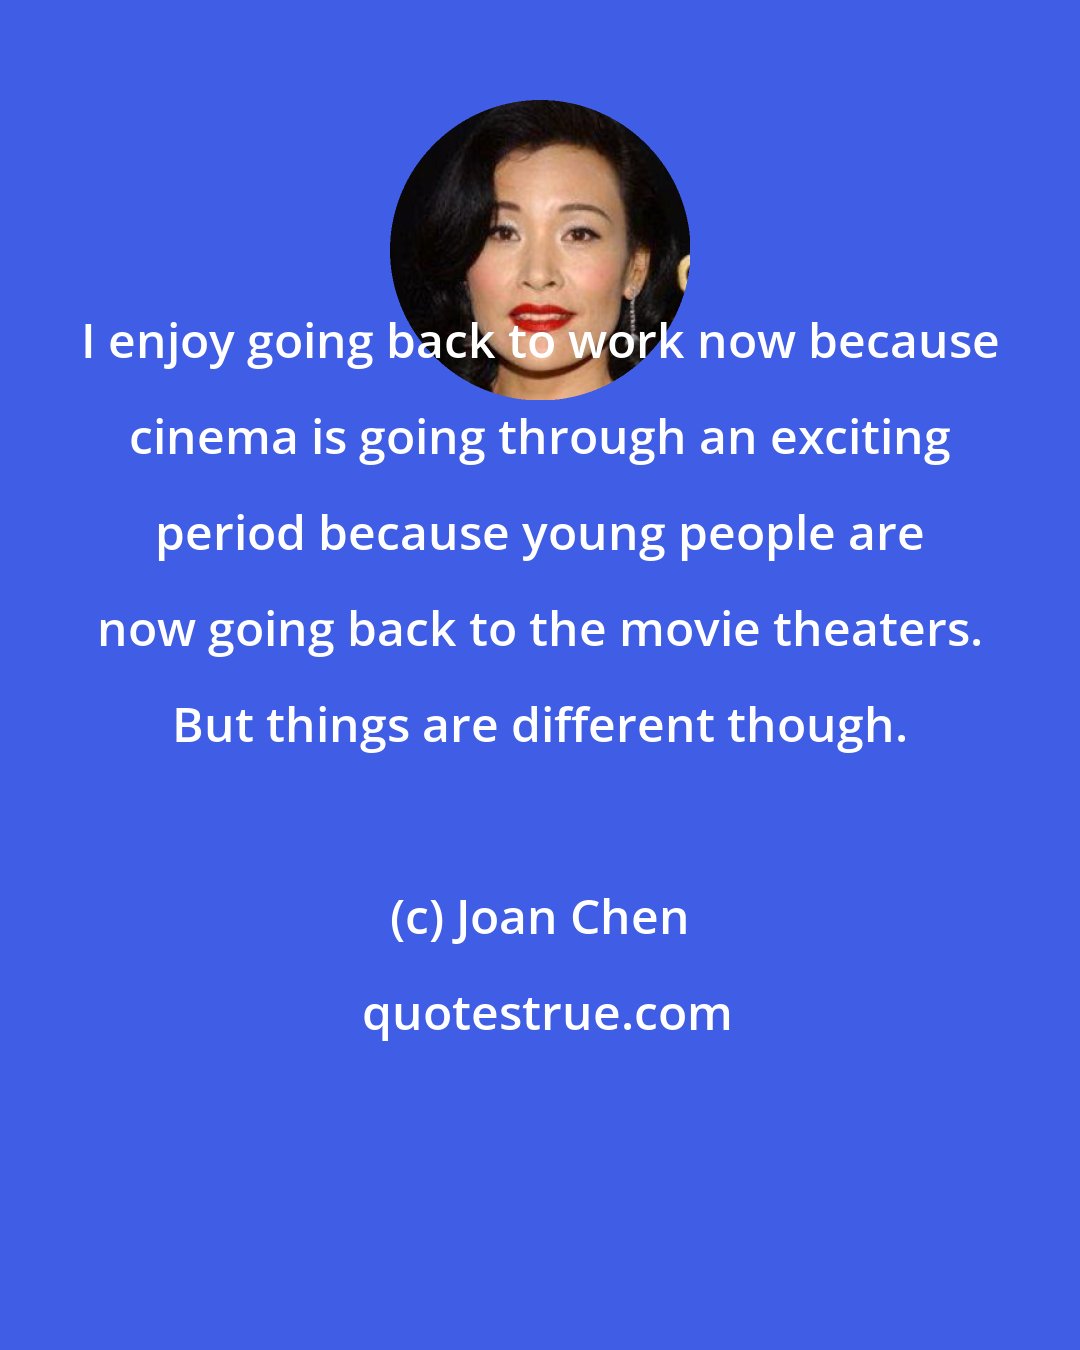 Joan Chen: I enjoy going back to work now because cinema is going through an exciting period because young people are now going back to the movie theaters. But things are different though.